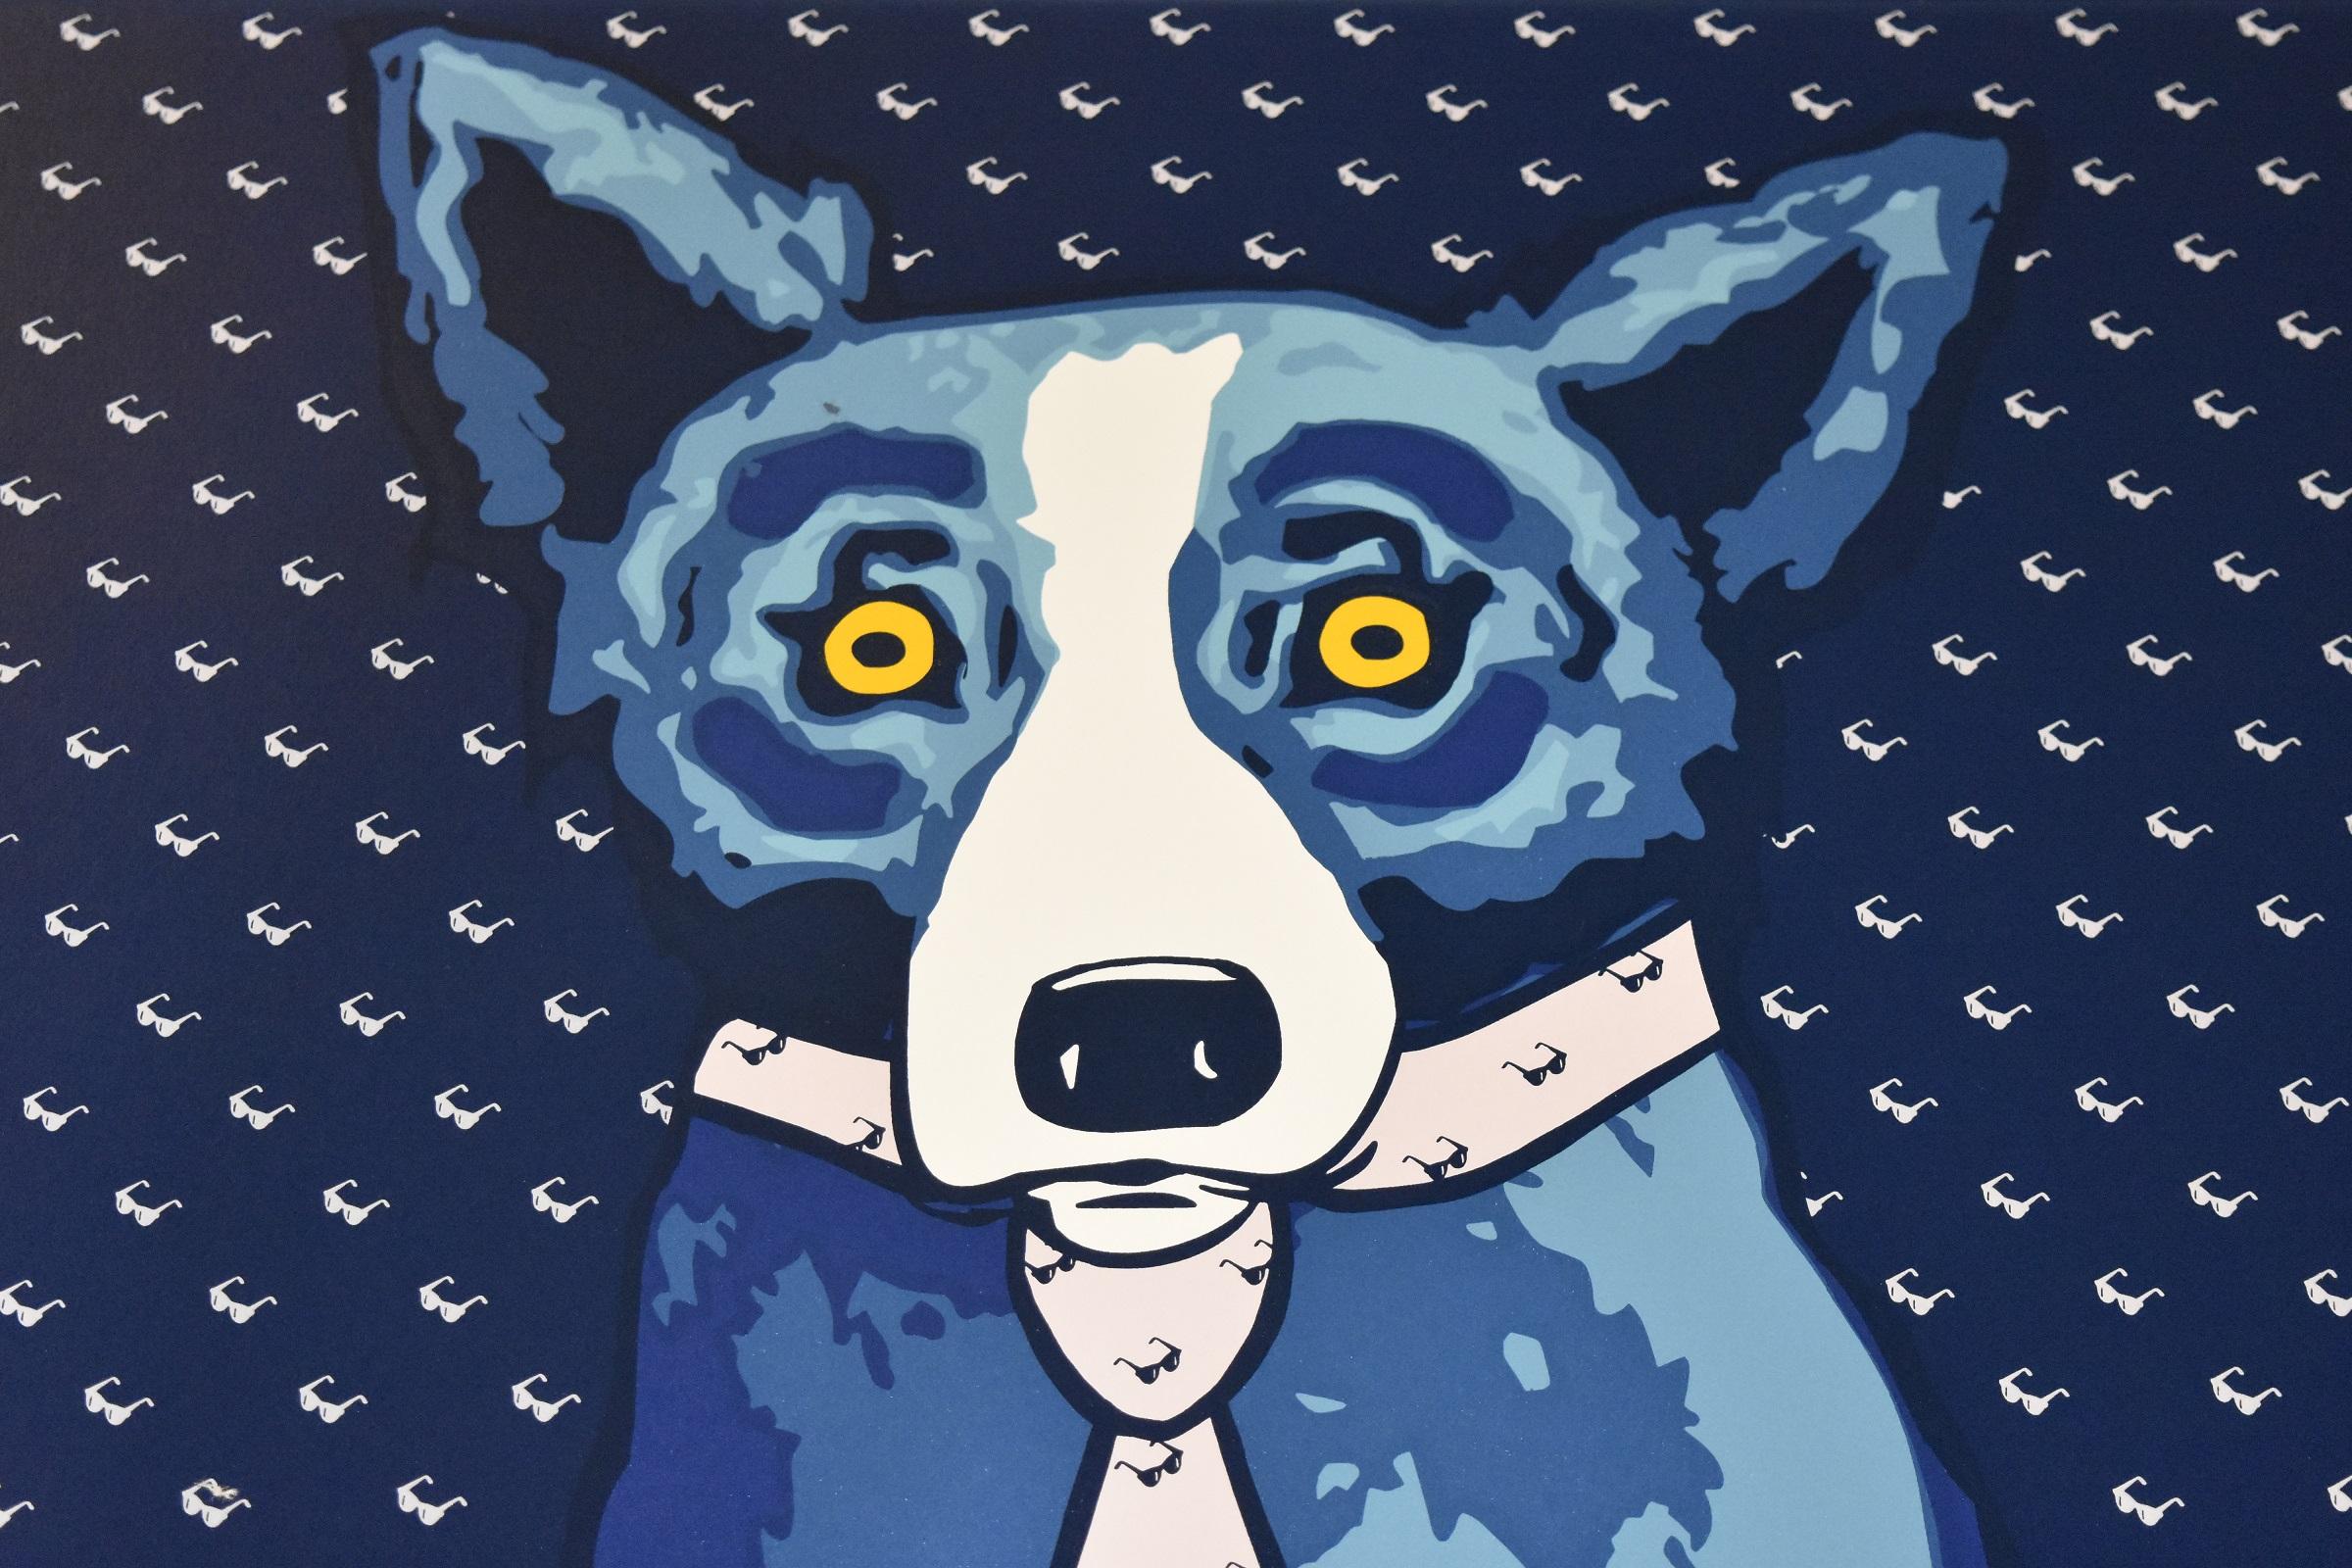 This Blue Dog work consists of 1 blue dog on a dark blue background with painted white eyeglasses donning a white tie with painted blue eyeglasses.  The blue dog's eyes are a soulful yellow.  This pop art animal original silkscreen print on paper is